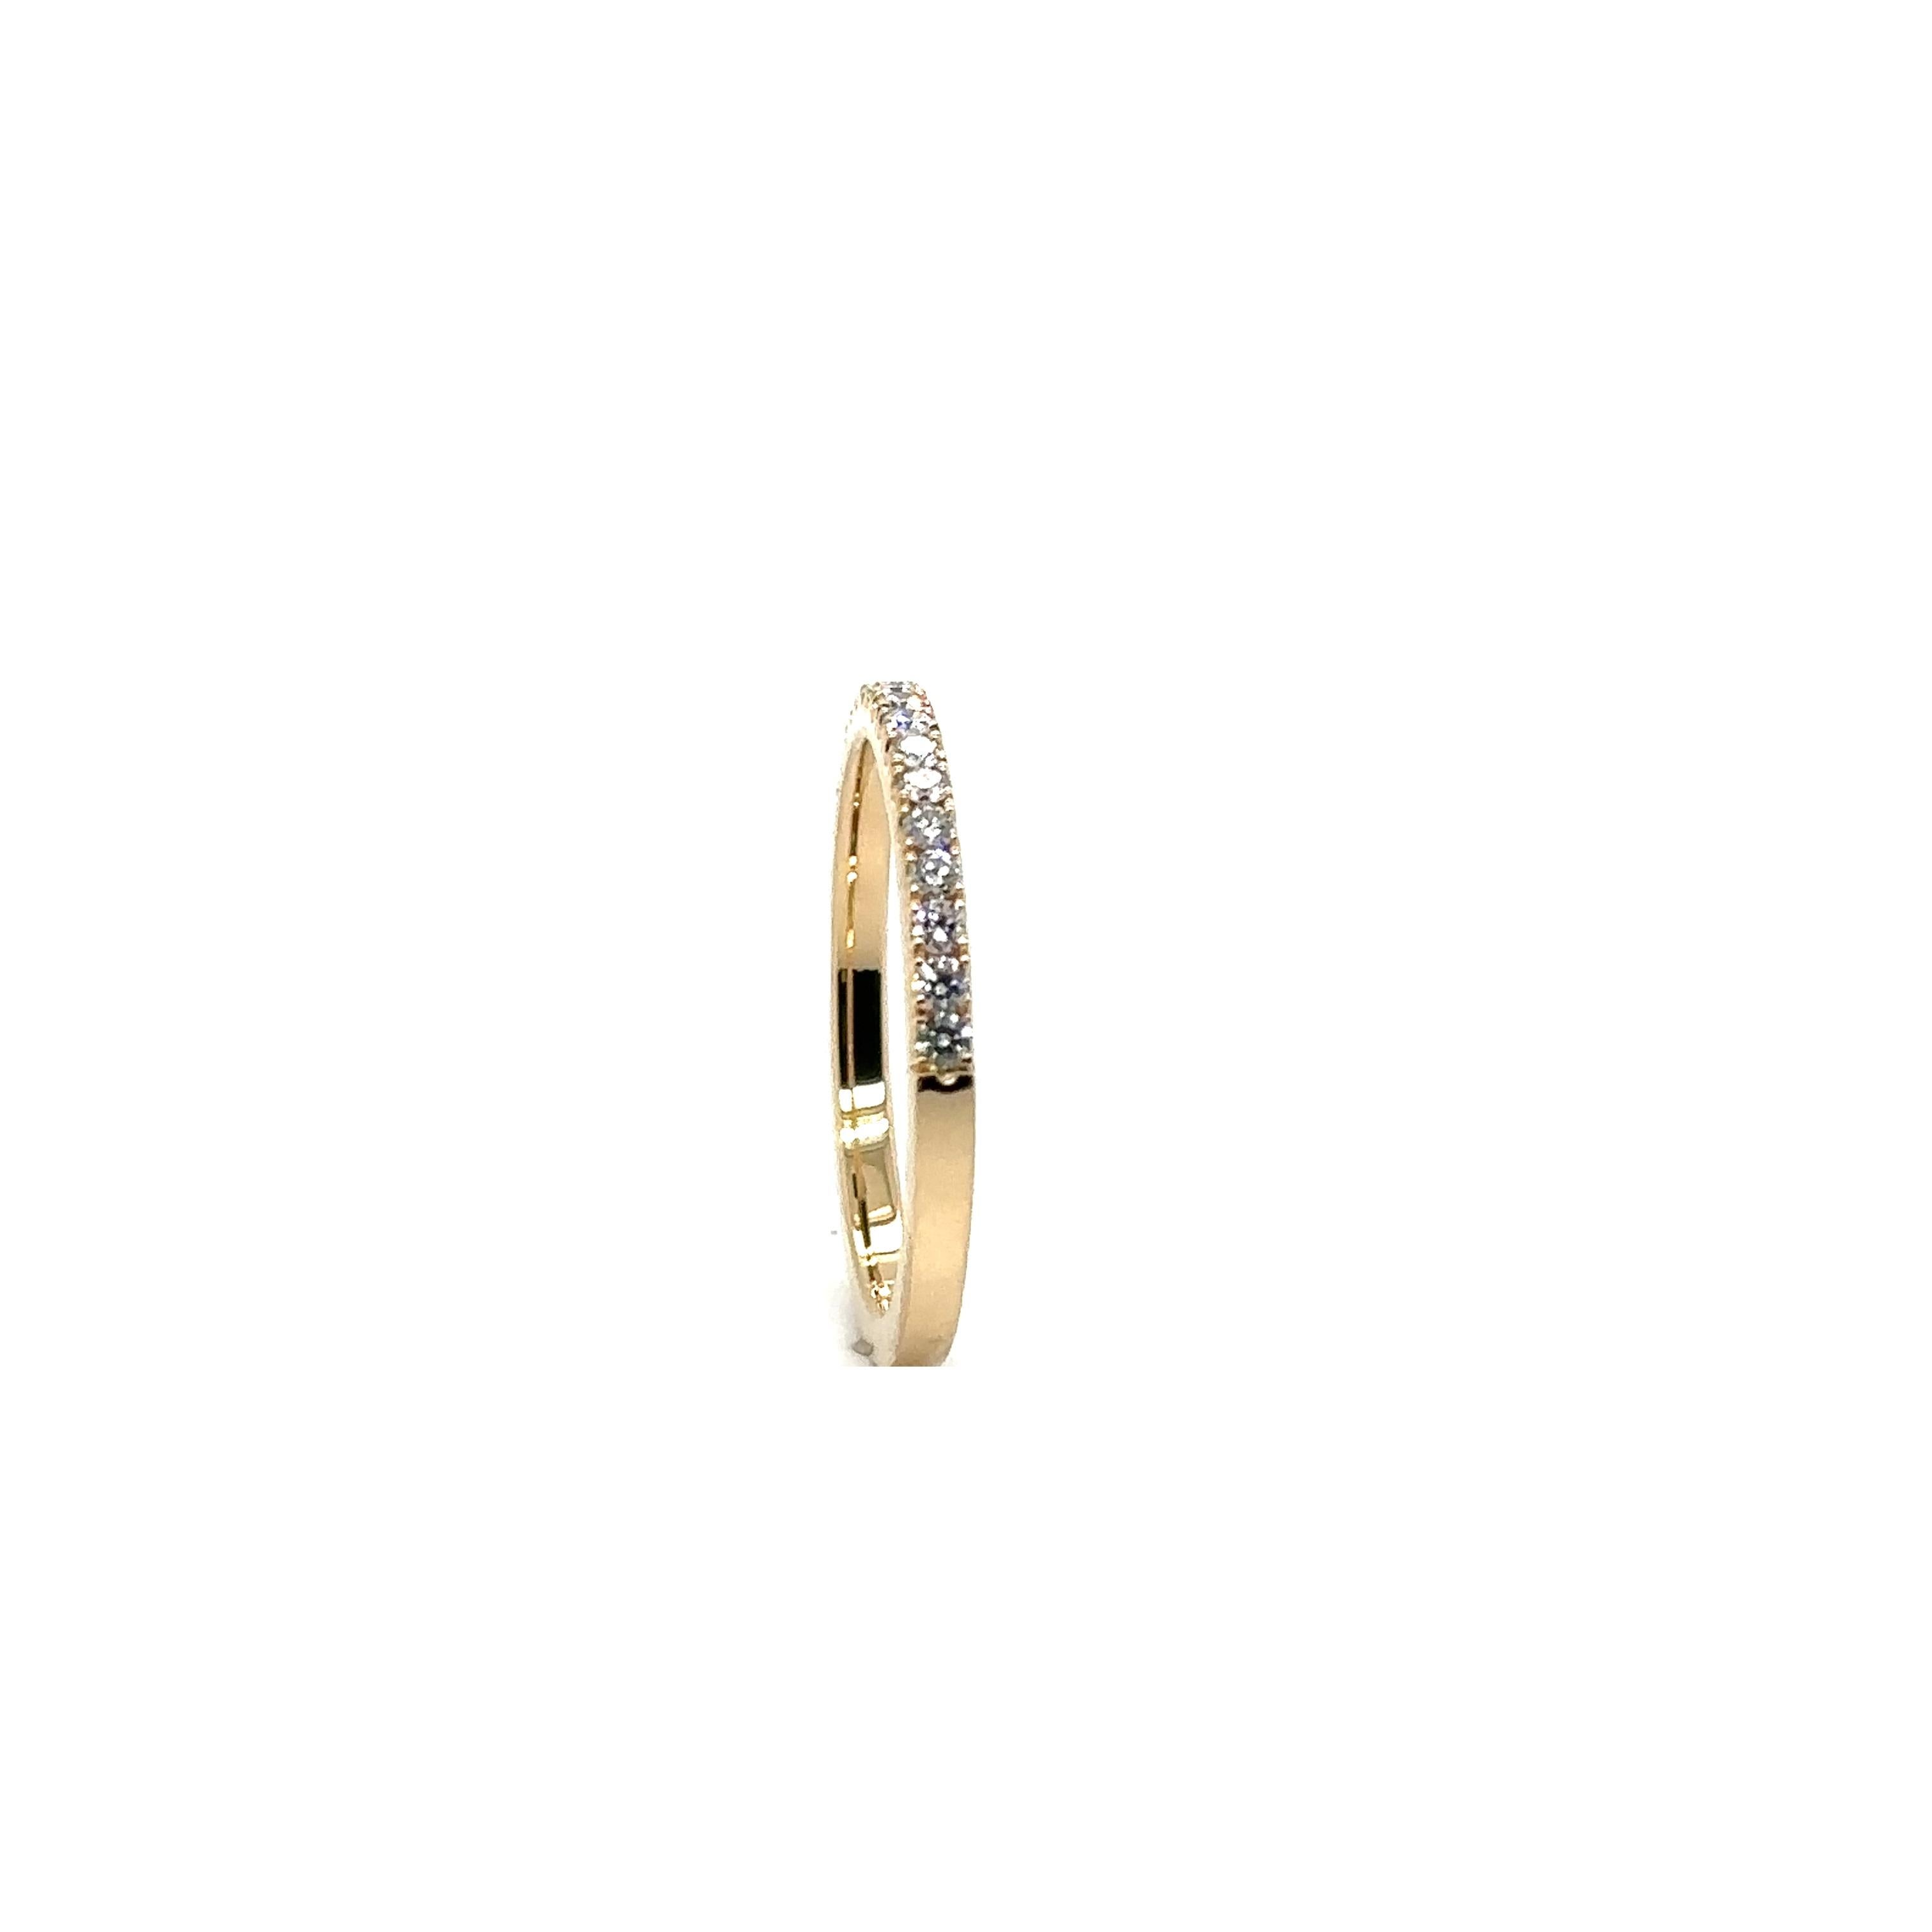 18KY WEDDING BAND with HALF WAY DIAMONDS
Metal: 18K YELLOW GOLD
Diamond Info: 
20-G/VS ROUND BRILLIANT DIAMONDS
SETTING MICRO PAVE MUSHROOM
Total Ct Weight: 0.27 cwt.
Item Weight: 2.19 gm
Ring Size: 6 (Re-sizable)
Measurements:  1.80 mm width
